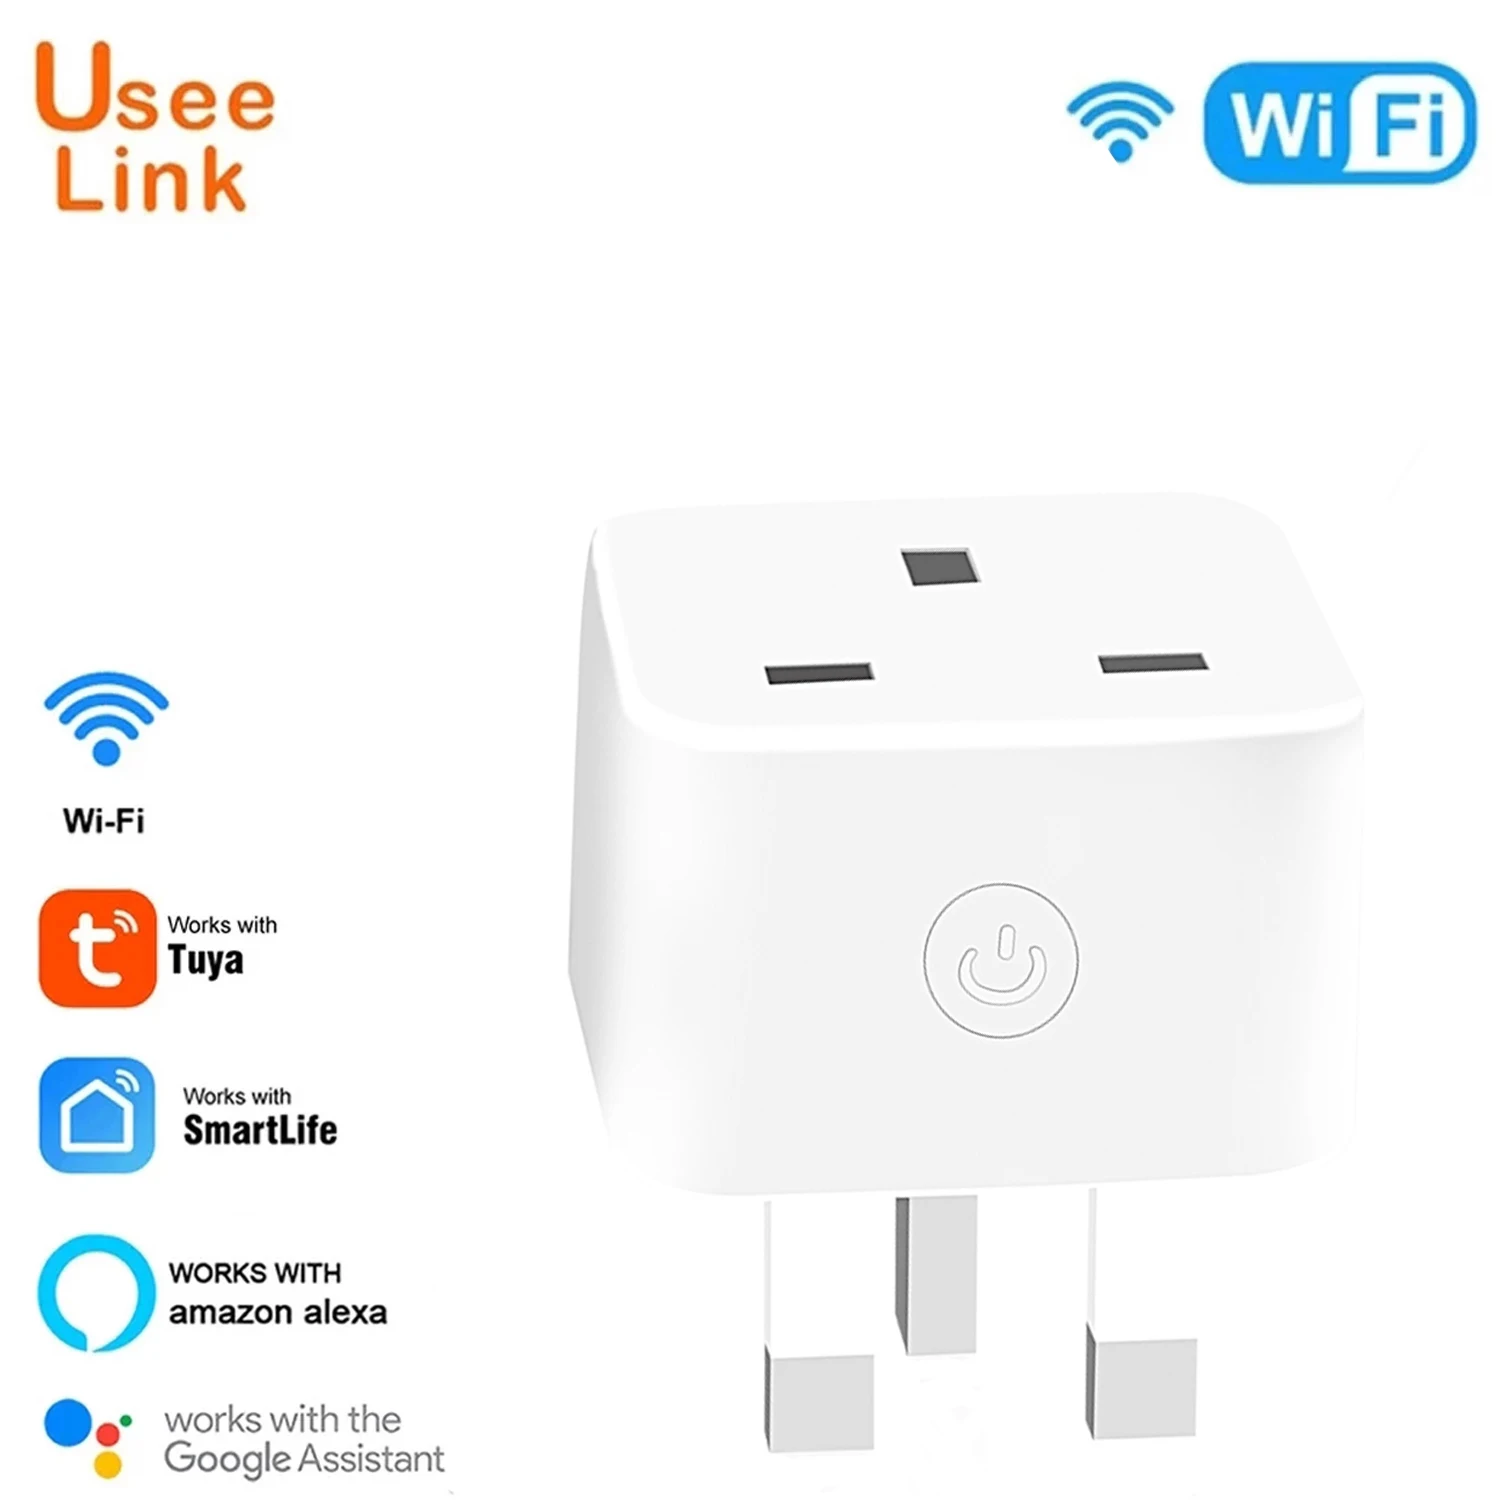 https://ae01.alicdn.com/kf/Sa0e498a86a0c4364bcbd3b8b244d7be8Y/UK-13A-Wifi-Smart-Plug-and-Socket-Smart-Home-APP-Timing-Voice-and-Remote-Control-Works.jpg